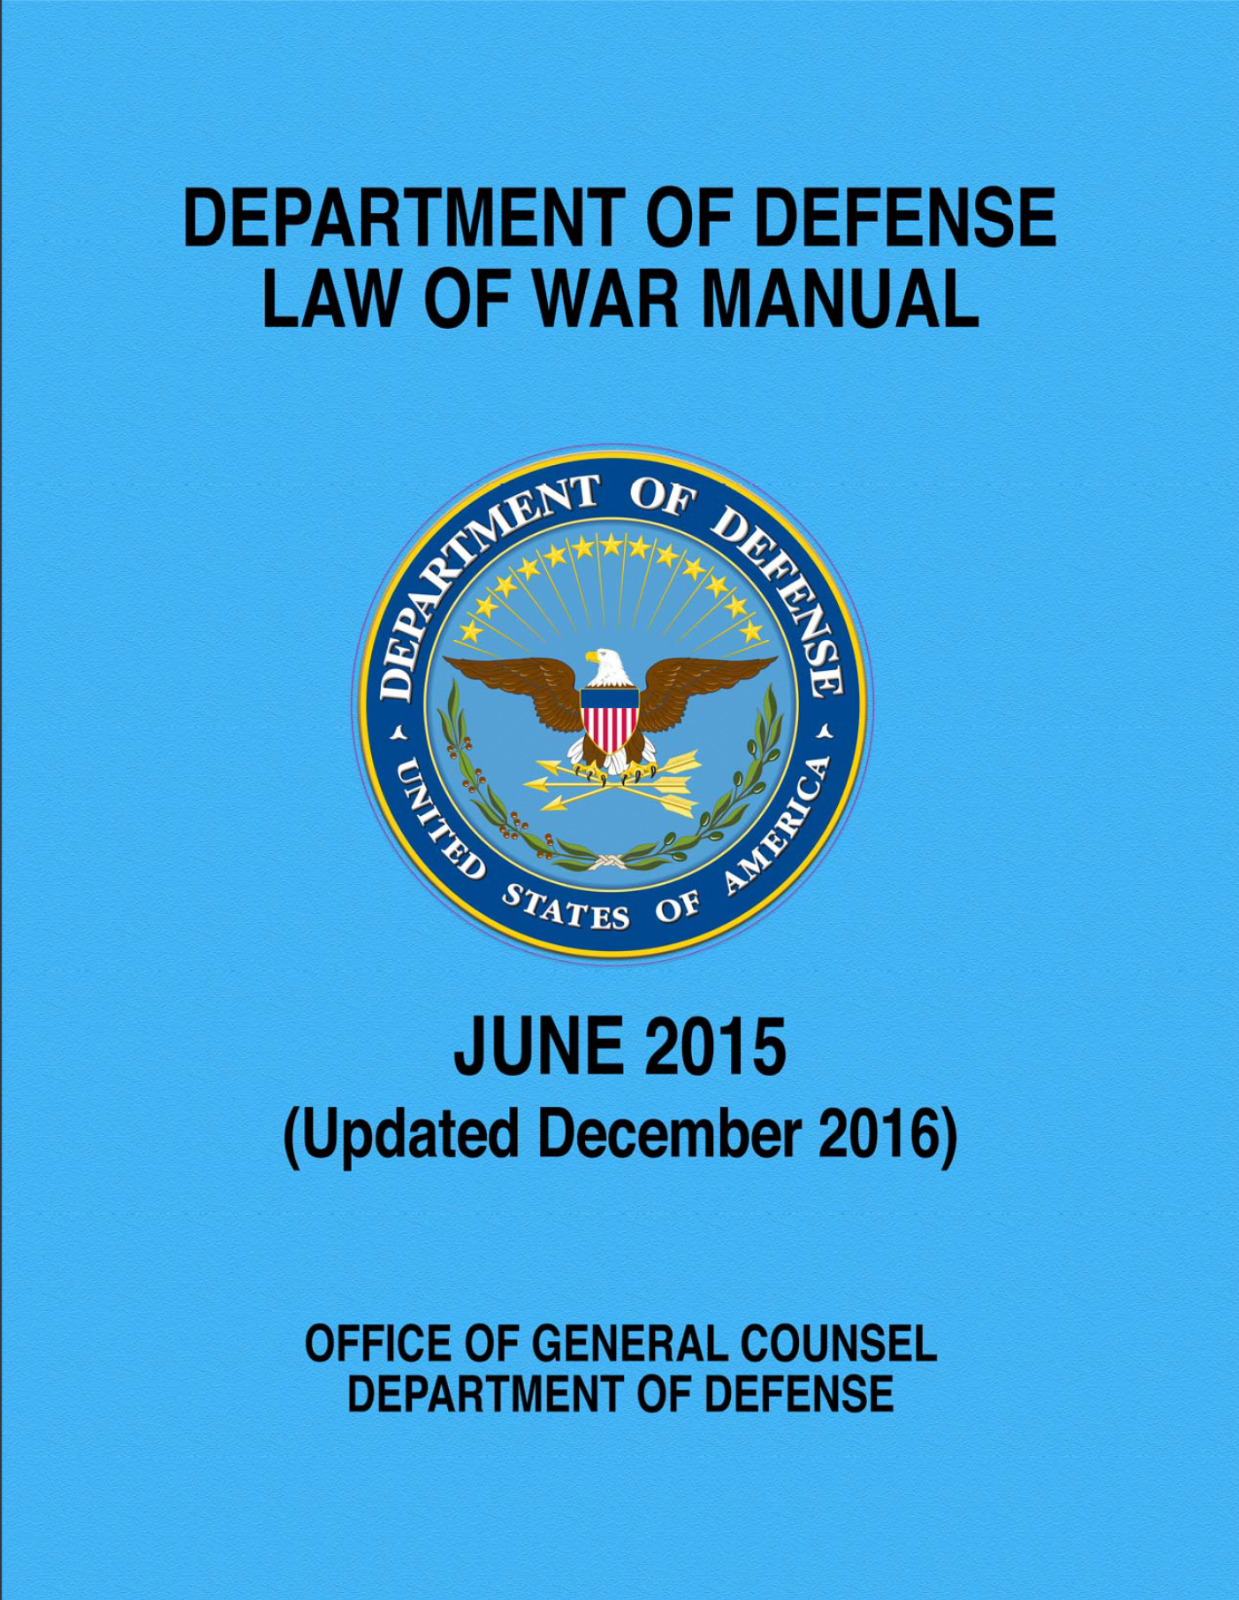 1,236 pg. DOD LAW OF WAR MANUAL - UPDATED + CONFLICT / ETHICS BONUSES on Data CD